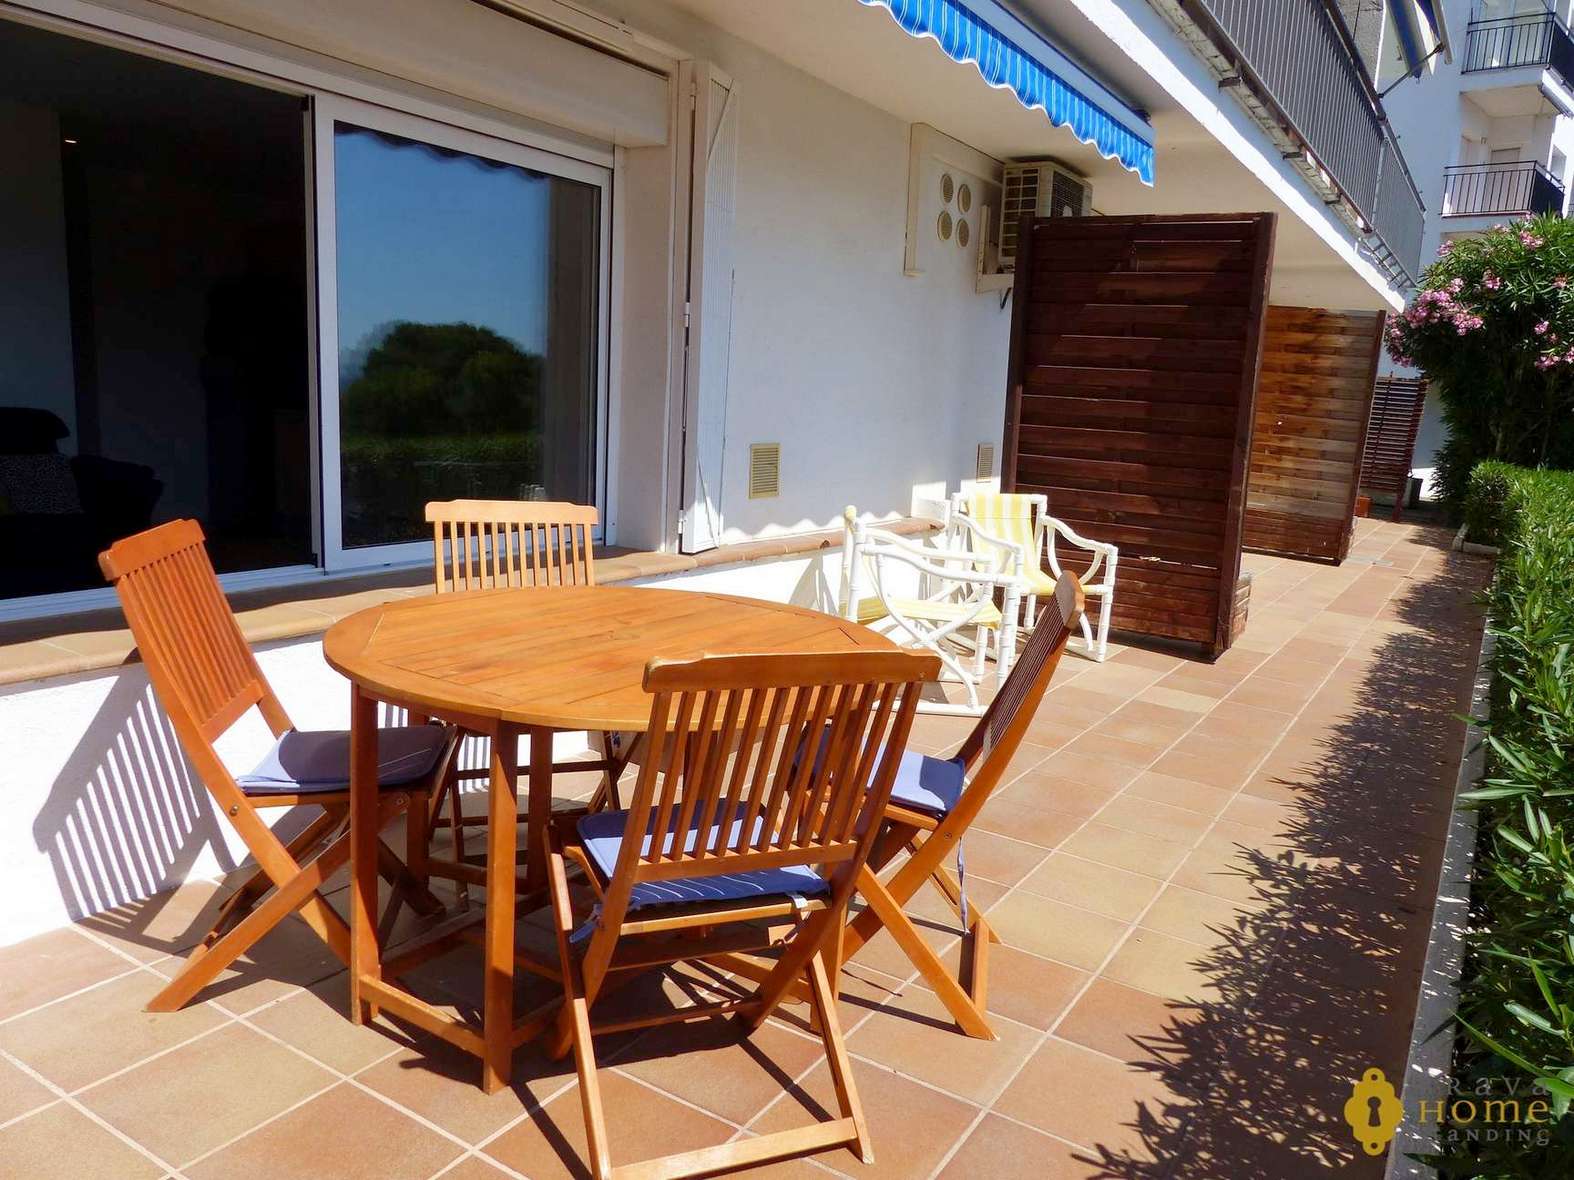 Beautiful apartment with sea view, for sale in Rosas - Almadrava